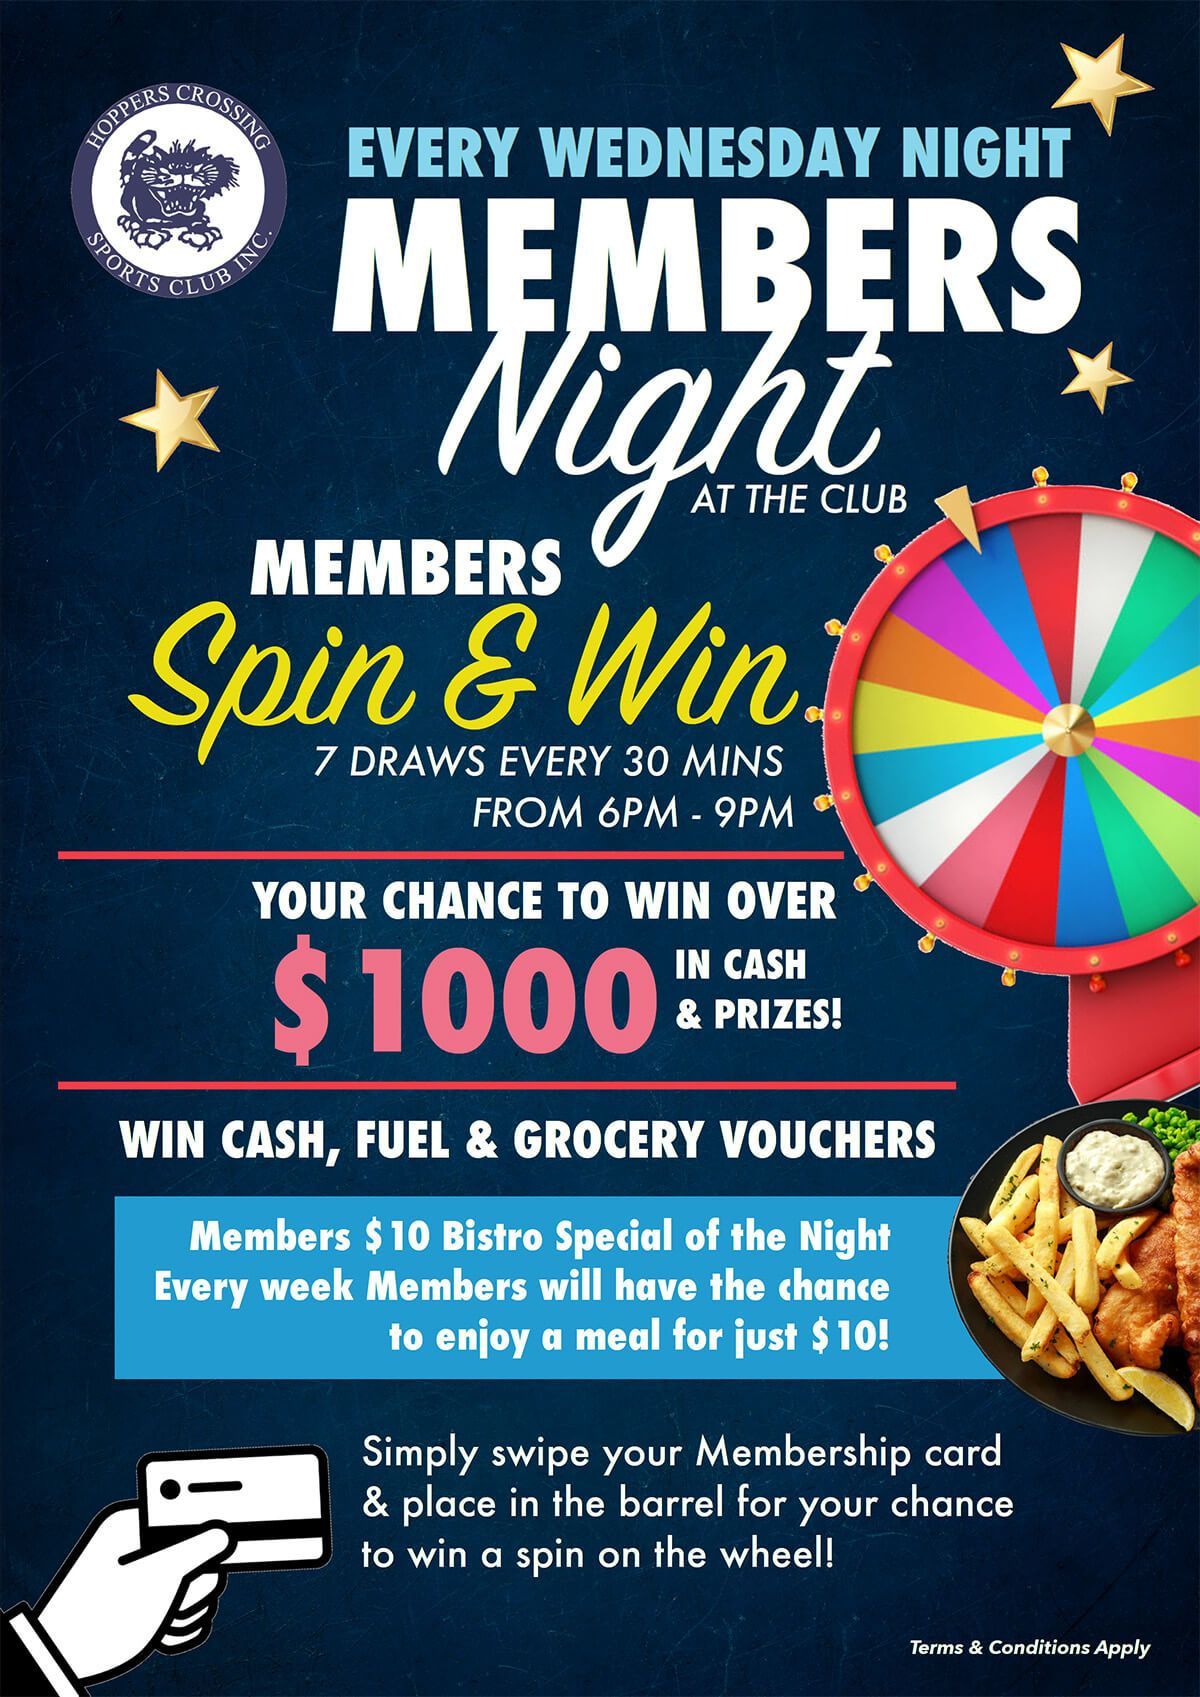 Members Night at Hoppers Crossing Sports Club